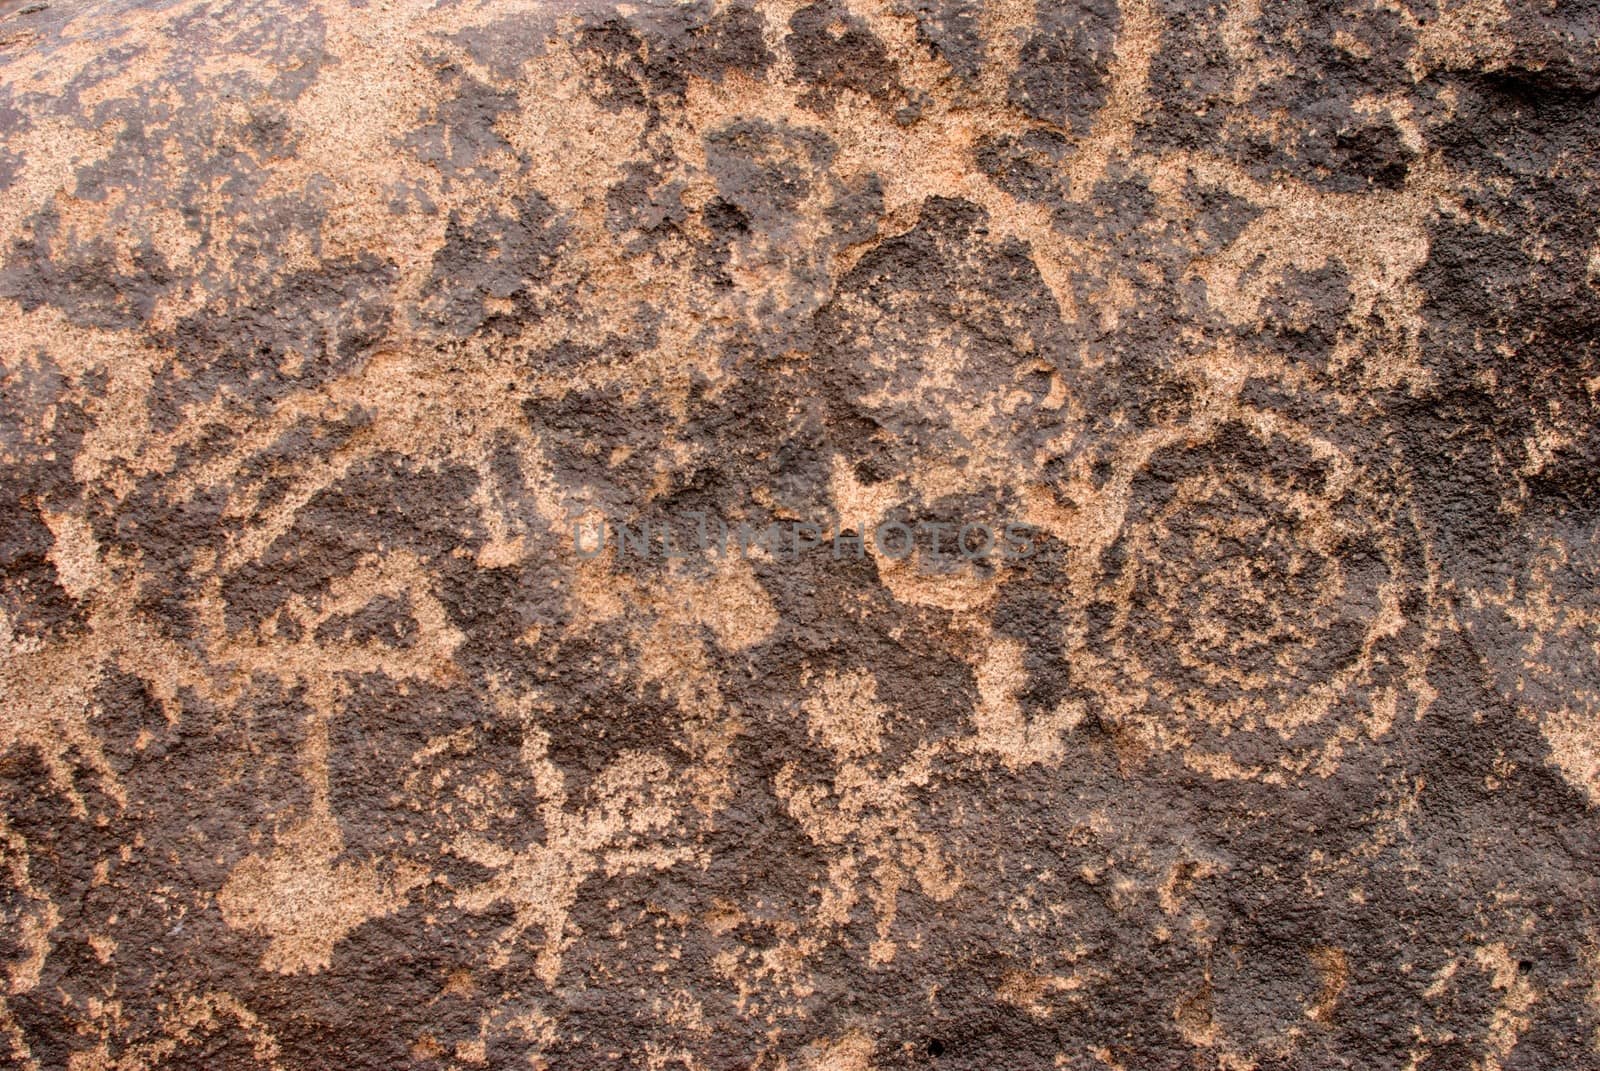 Ancient rock bearing hand carved petraglyphs of animals, spiders and people